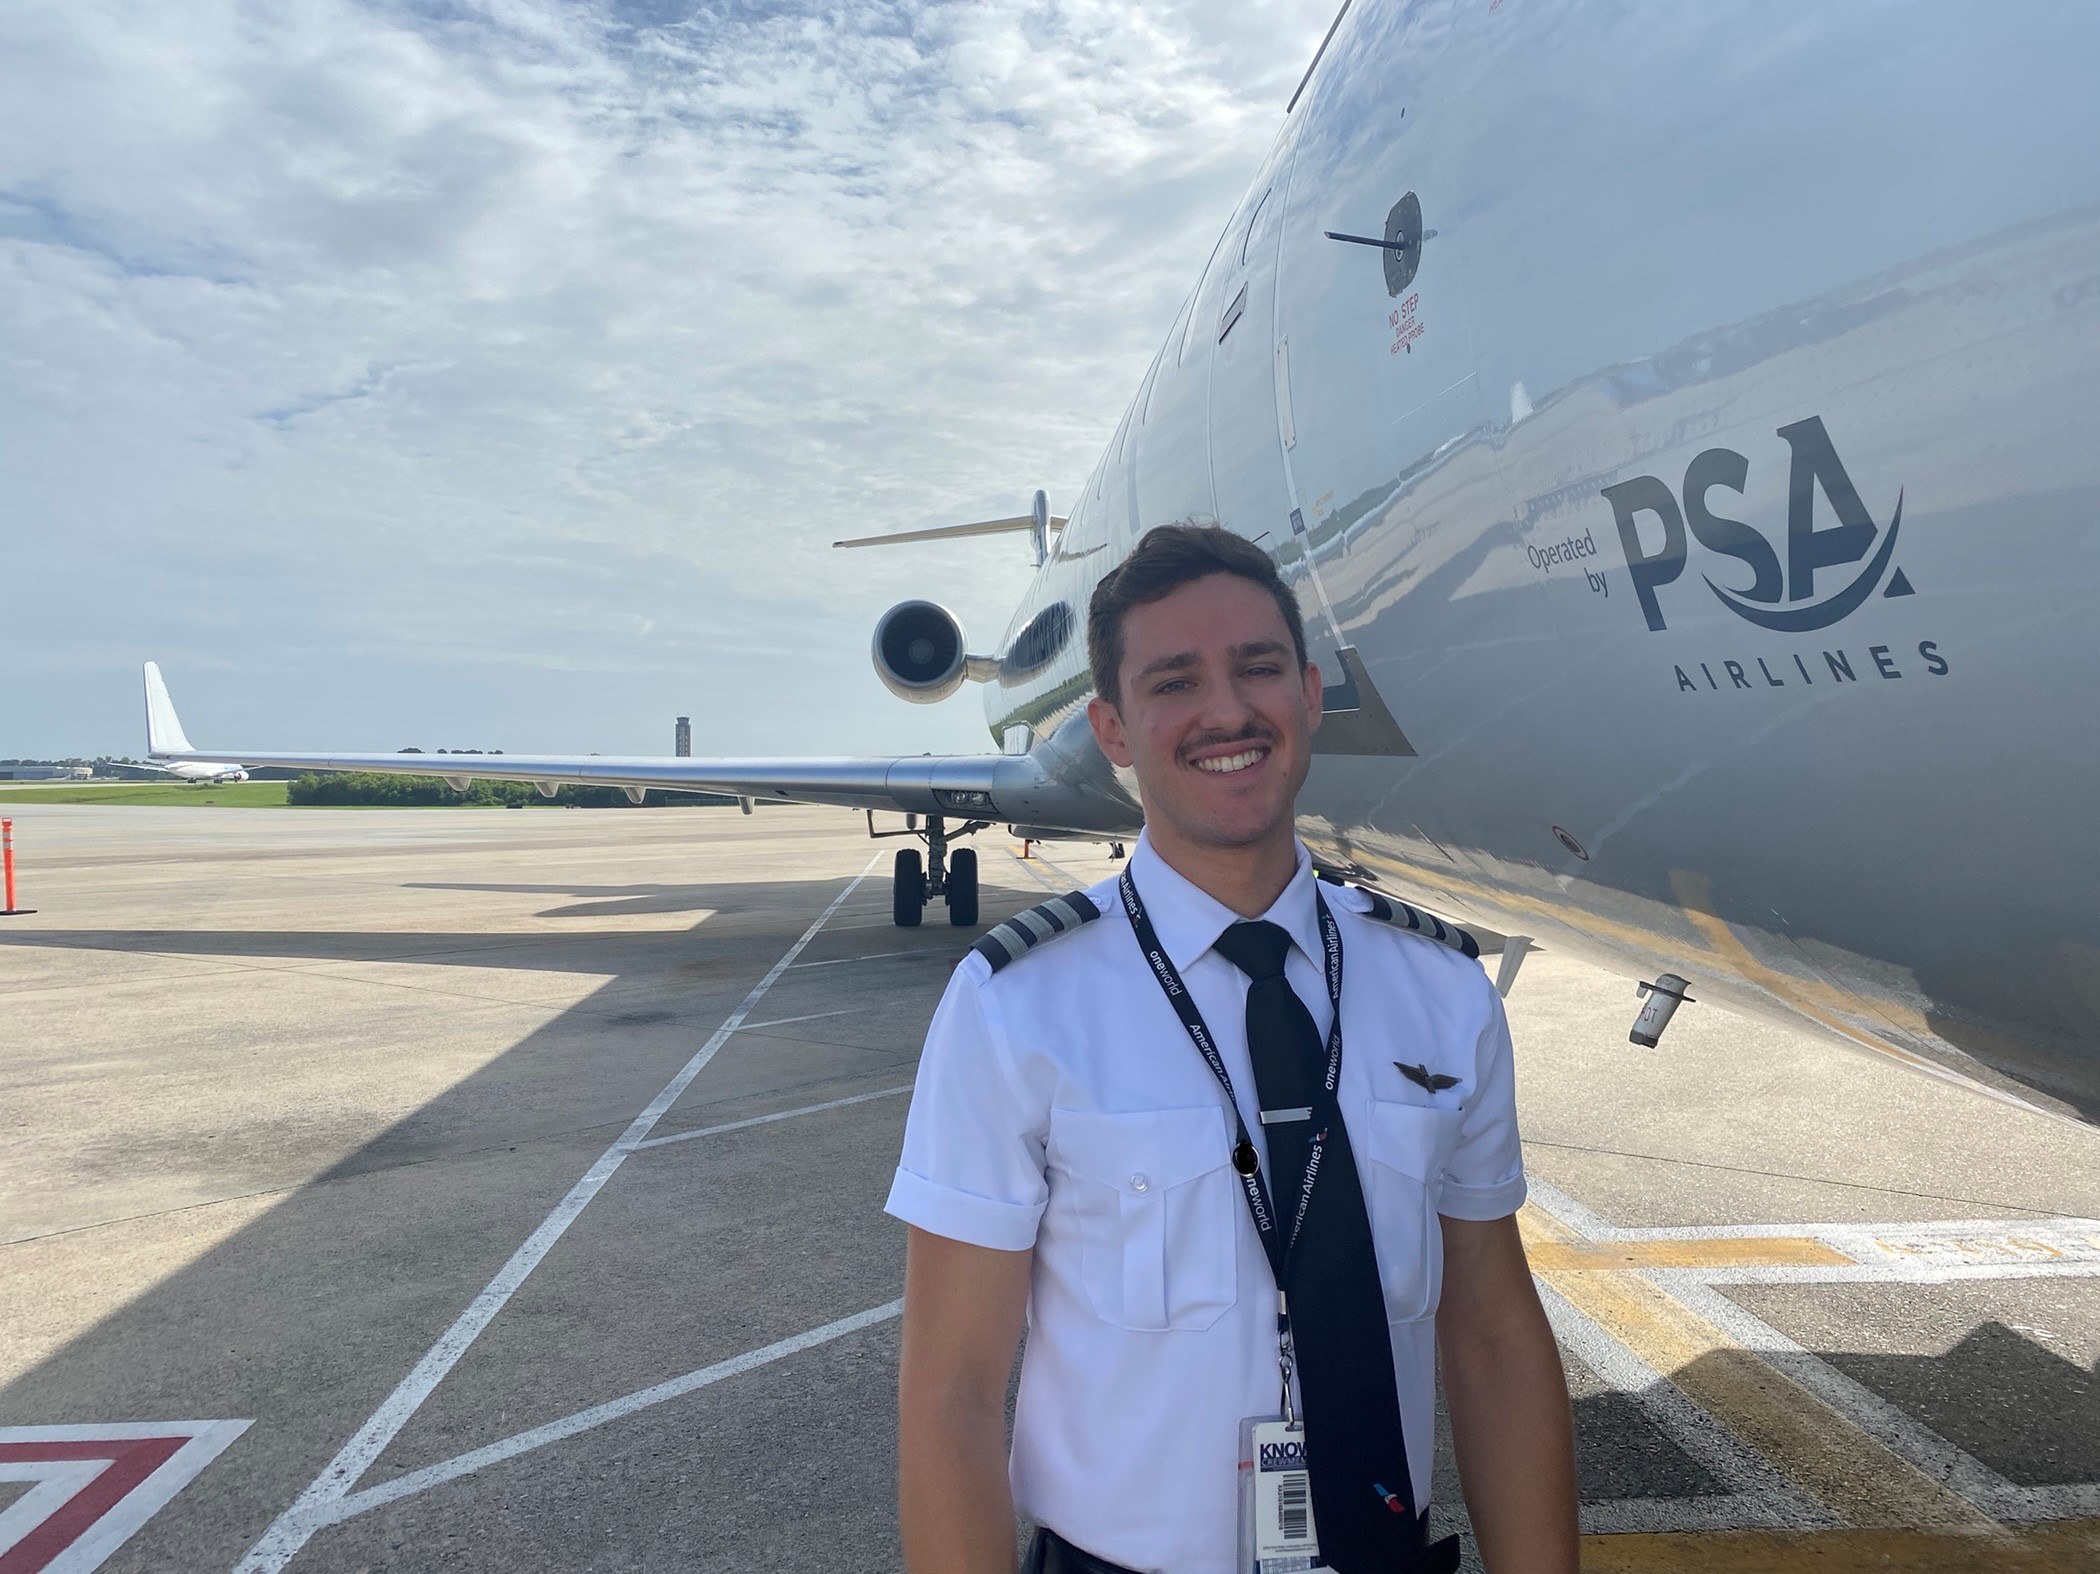 First Officer Adam Sciupac outside standing on the side of PSA aircraft smiling